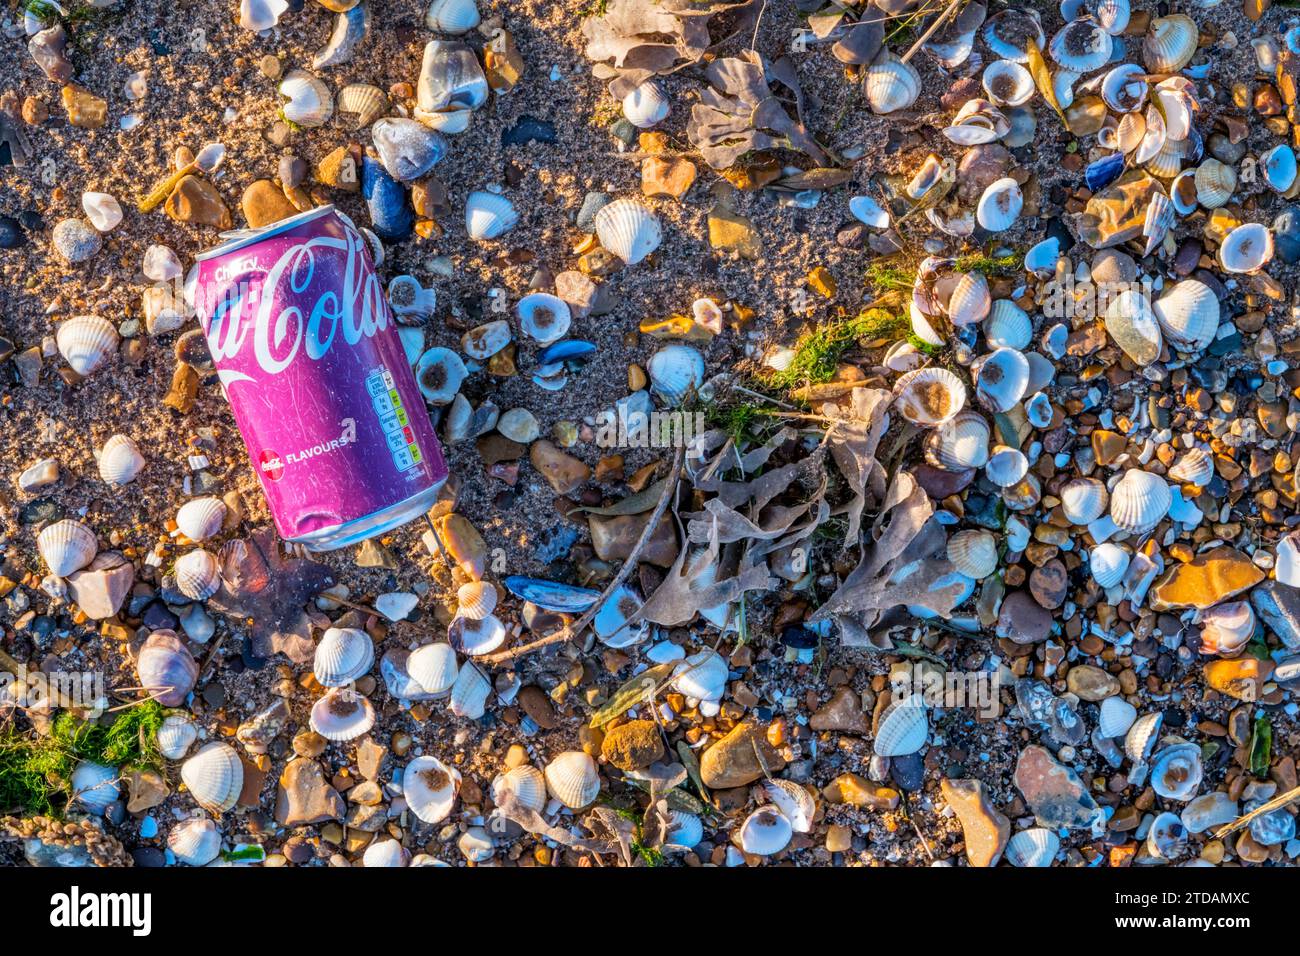 An old, faded Coca-Cola can washed up on a shingle beach. Stock Photo